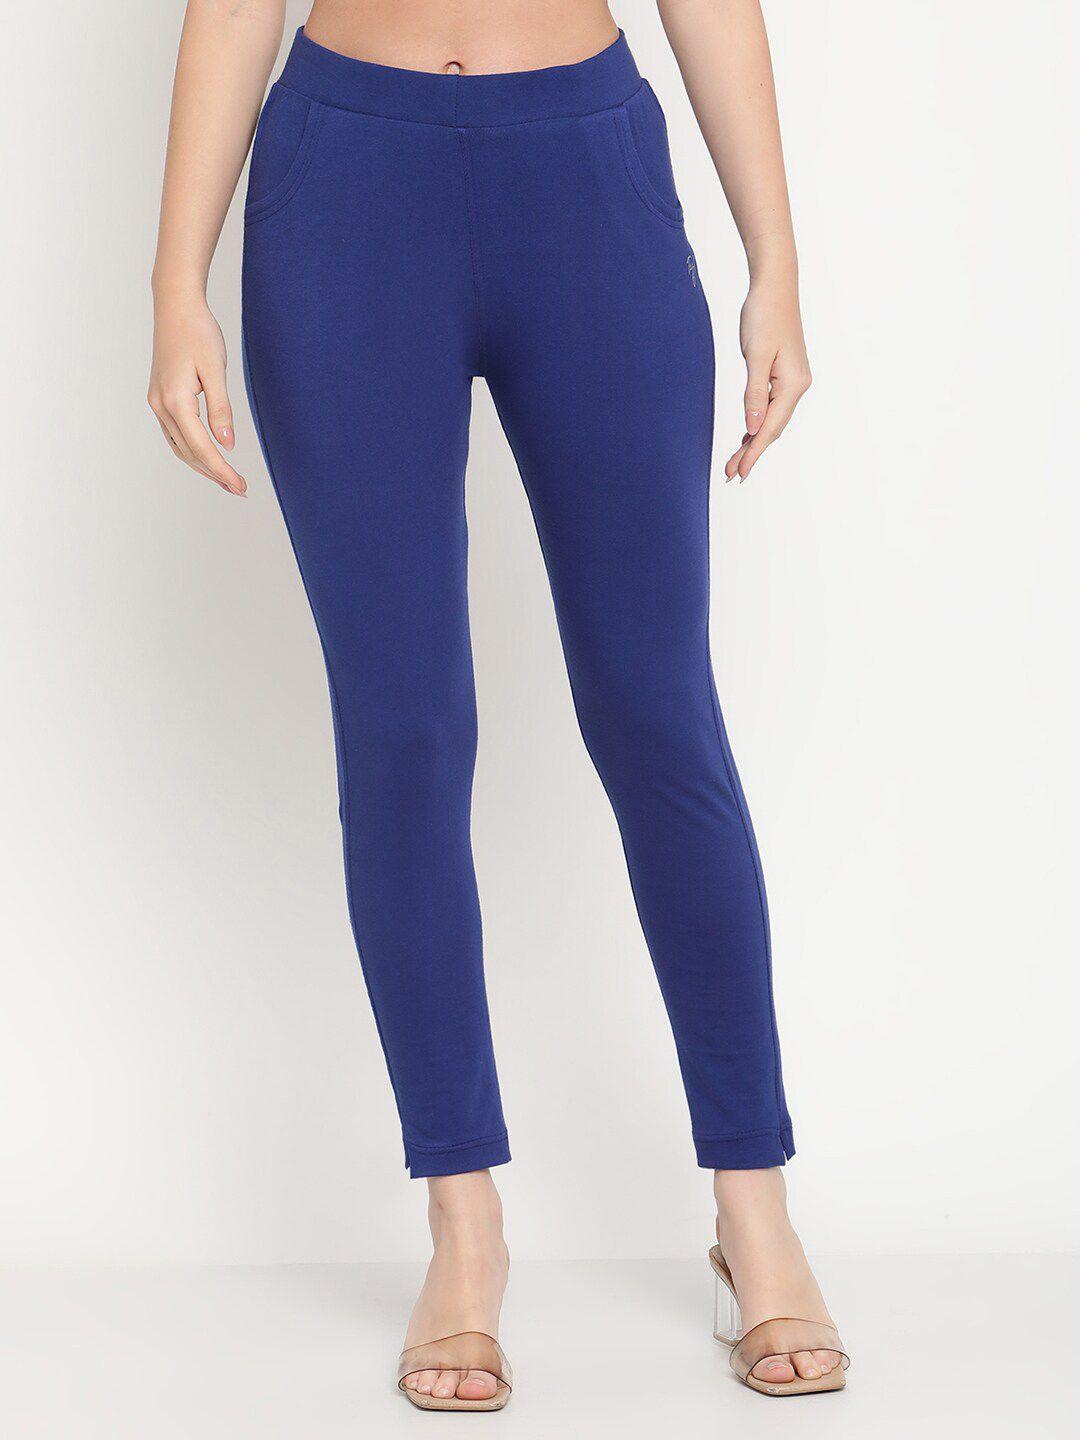 tag 7 women blue solid jeggings